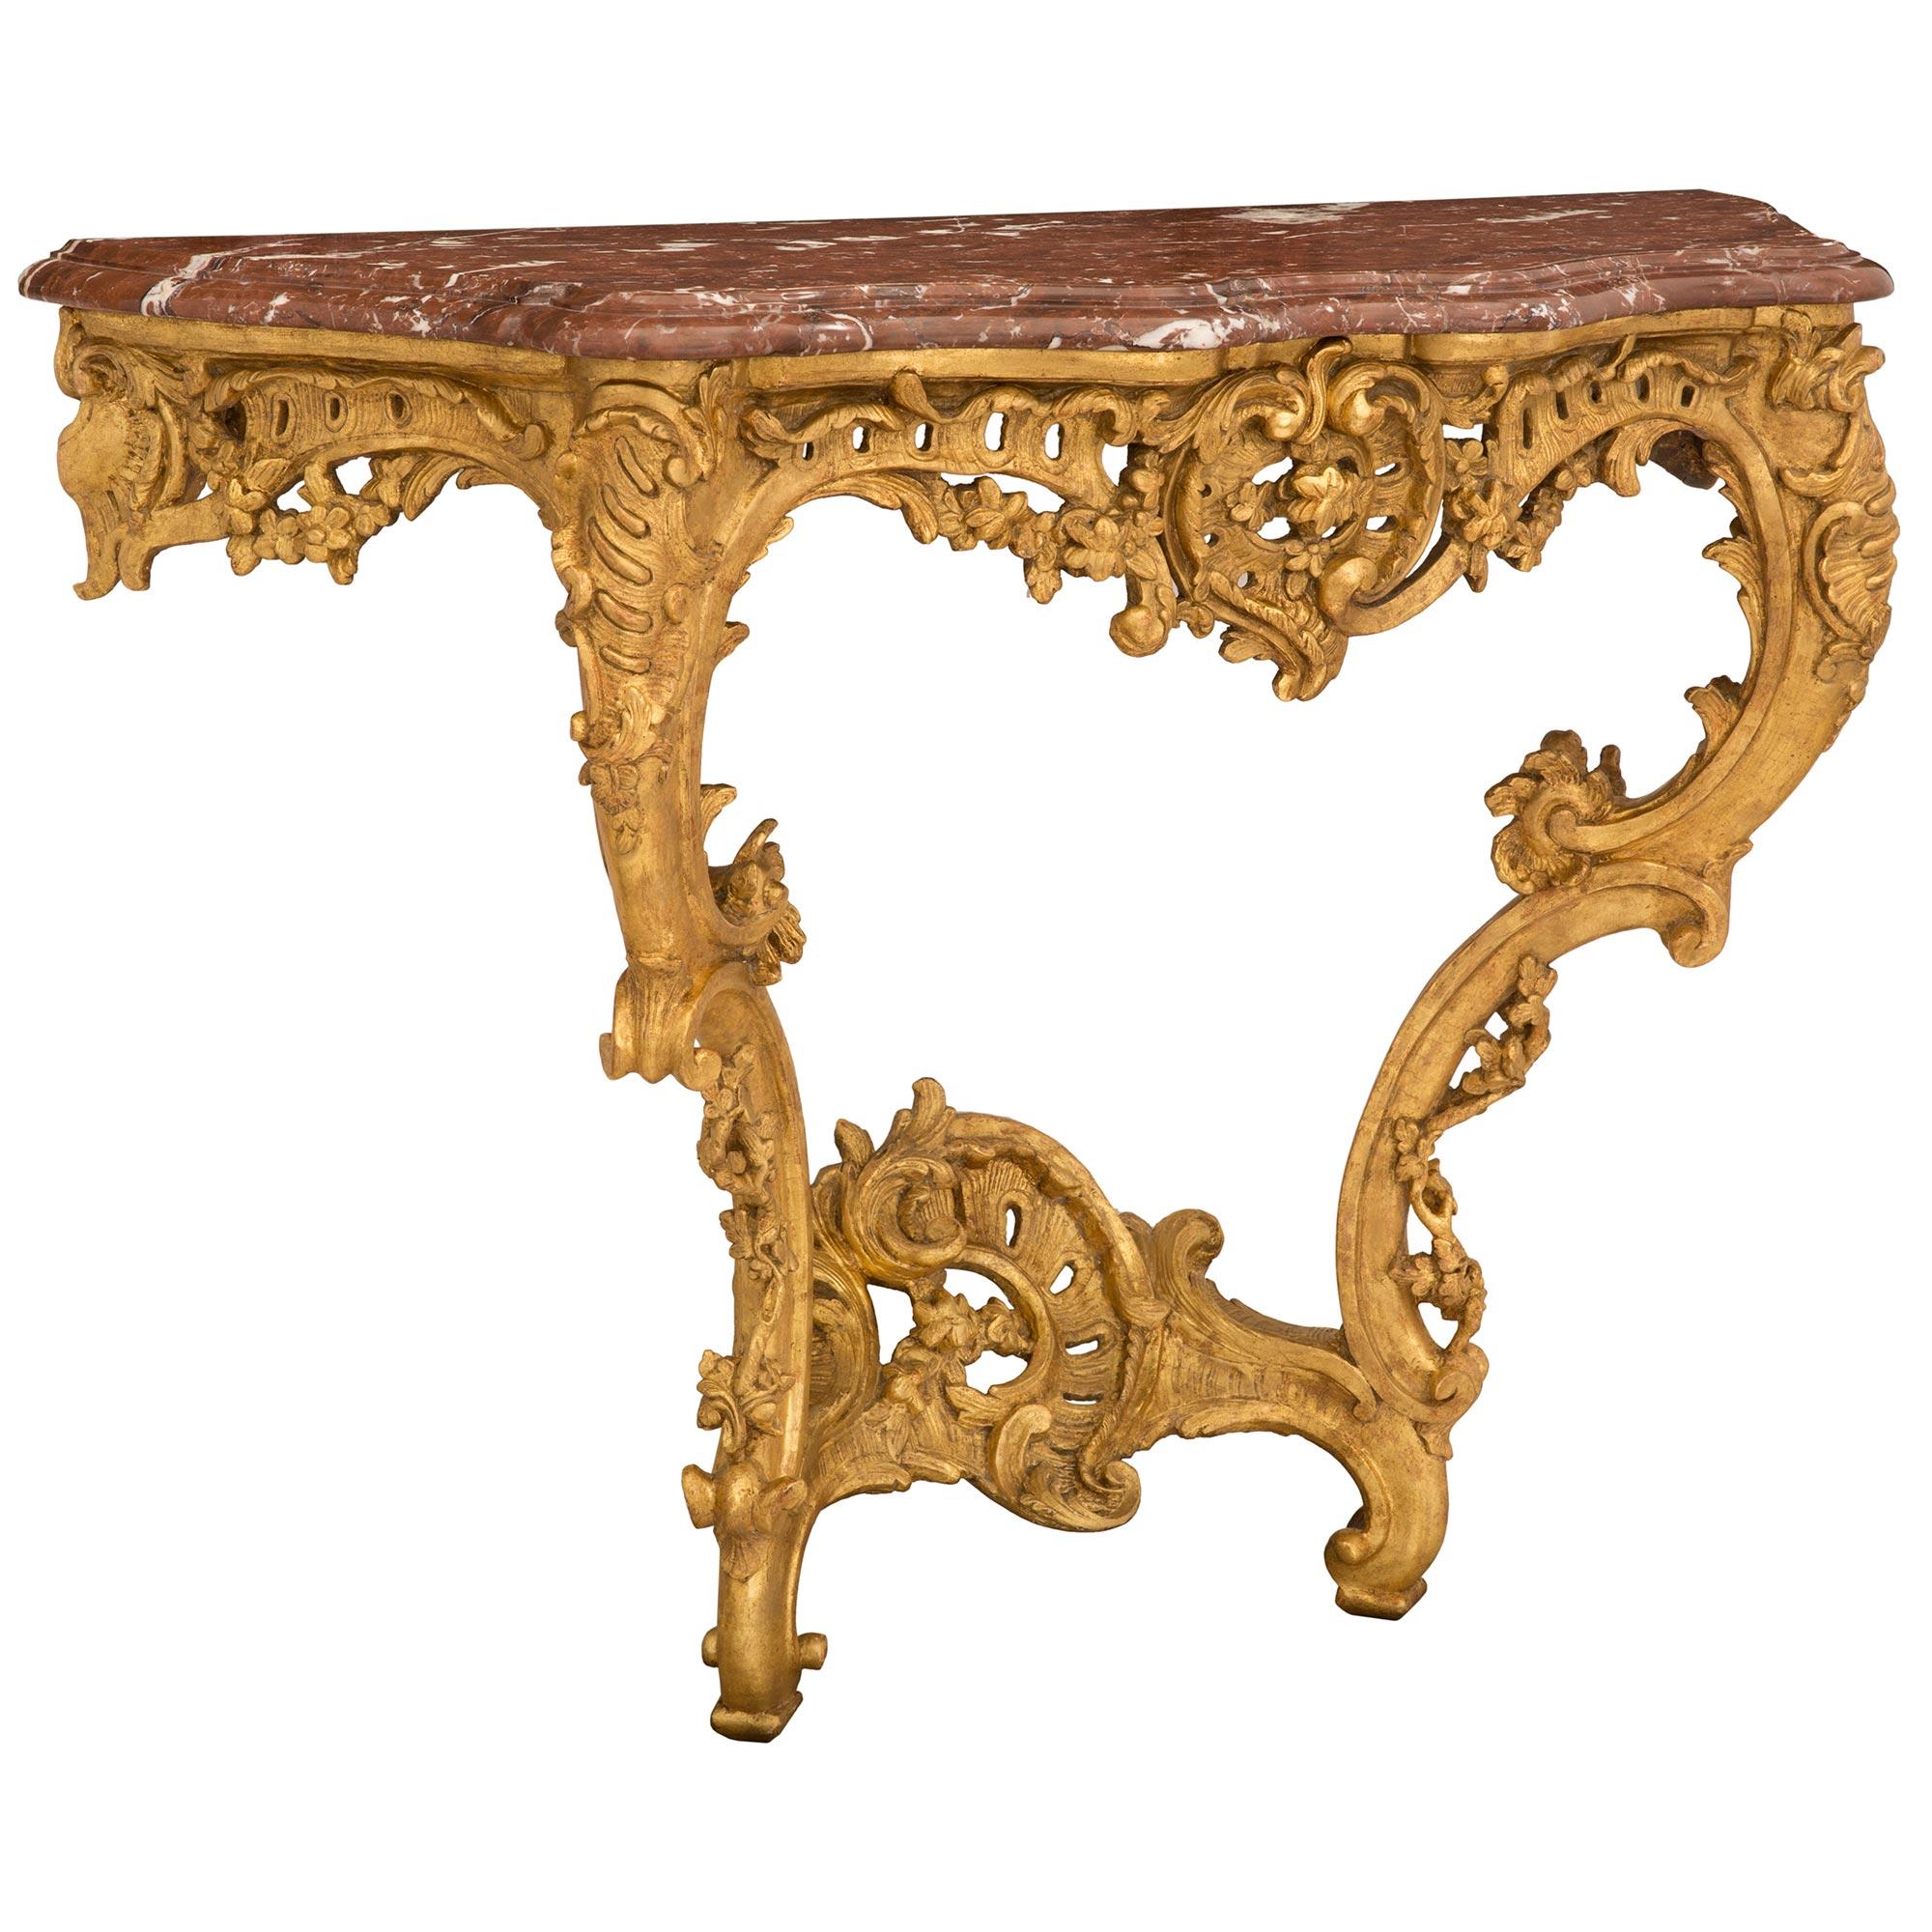 Italian 18th Century Régence Period Giltwood and Rouge Royale Marble Console In Good Condition For Sale In West Palm Beach, FL